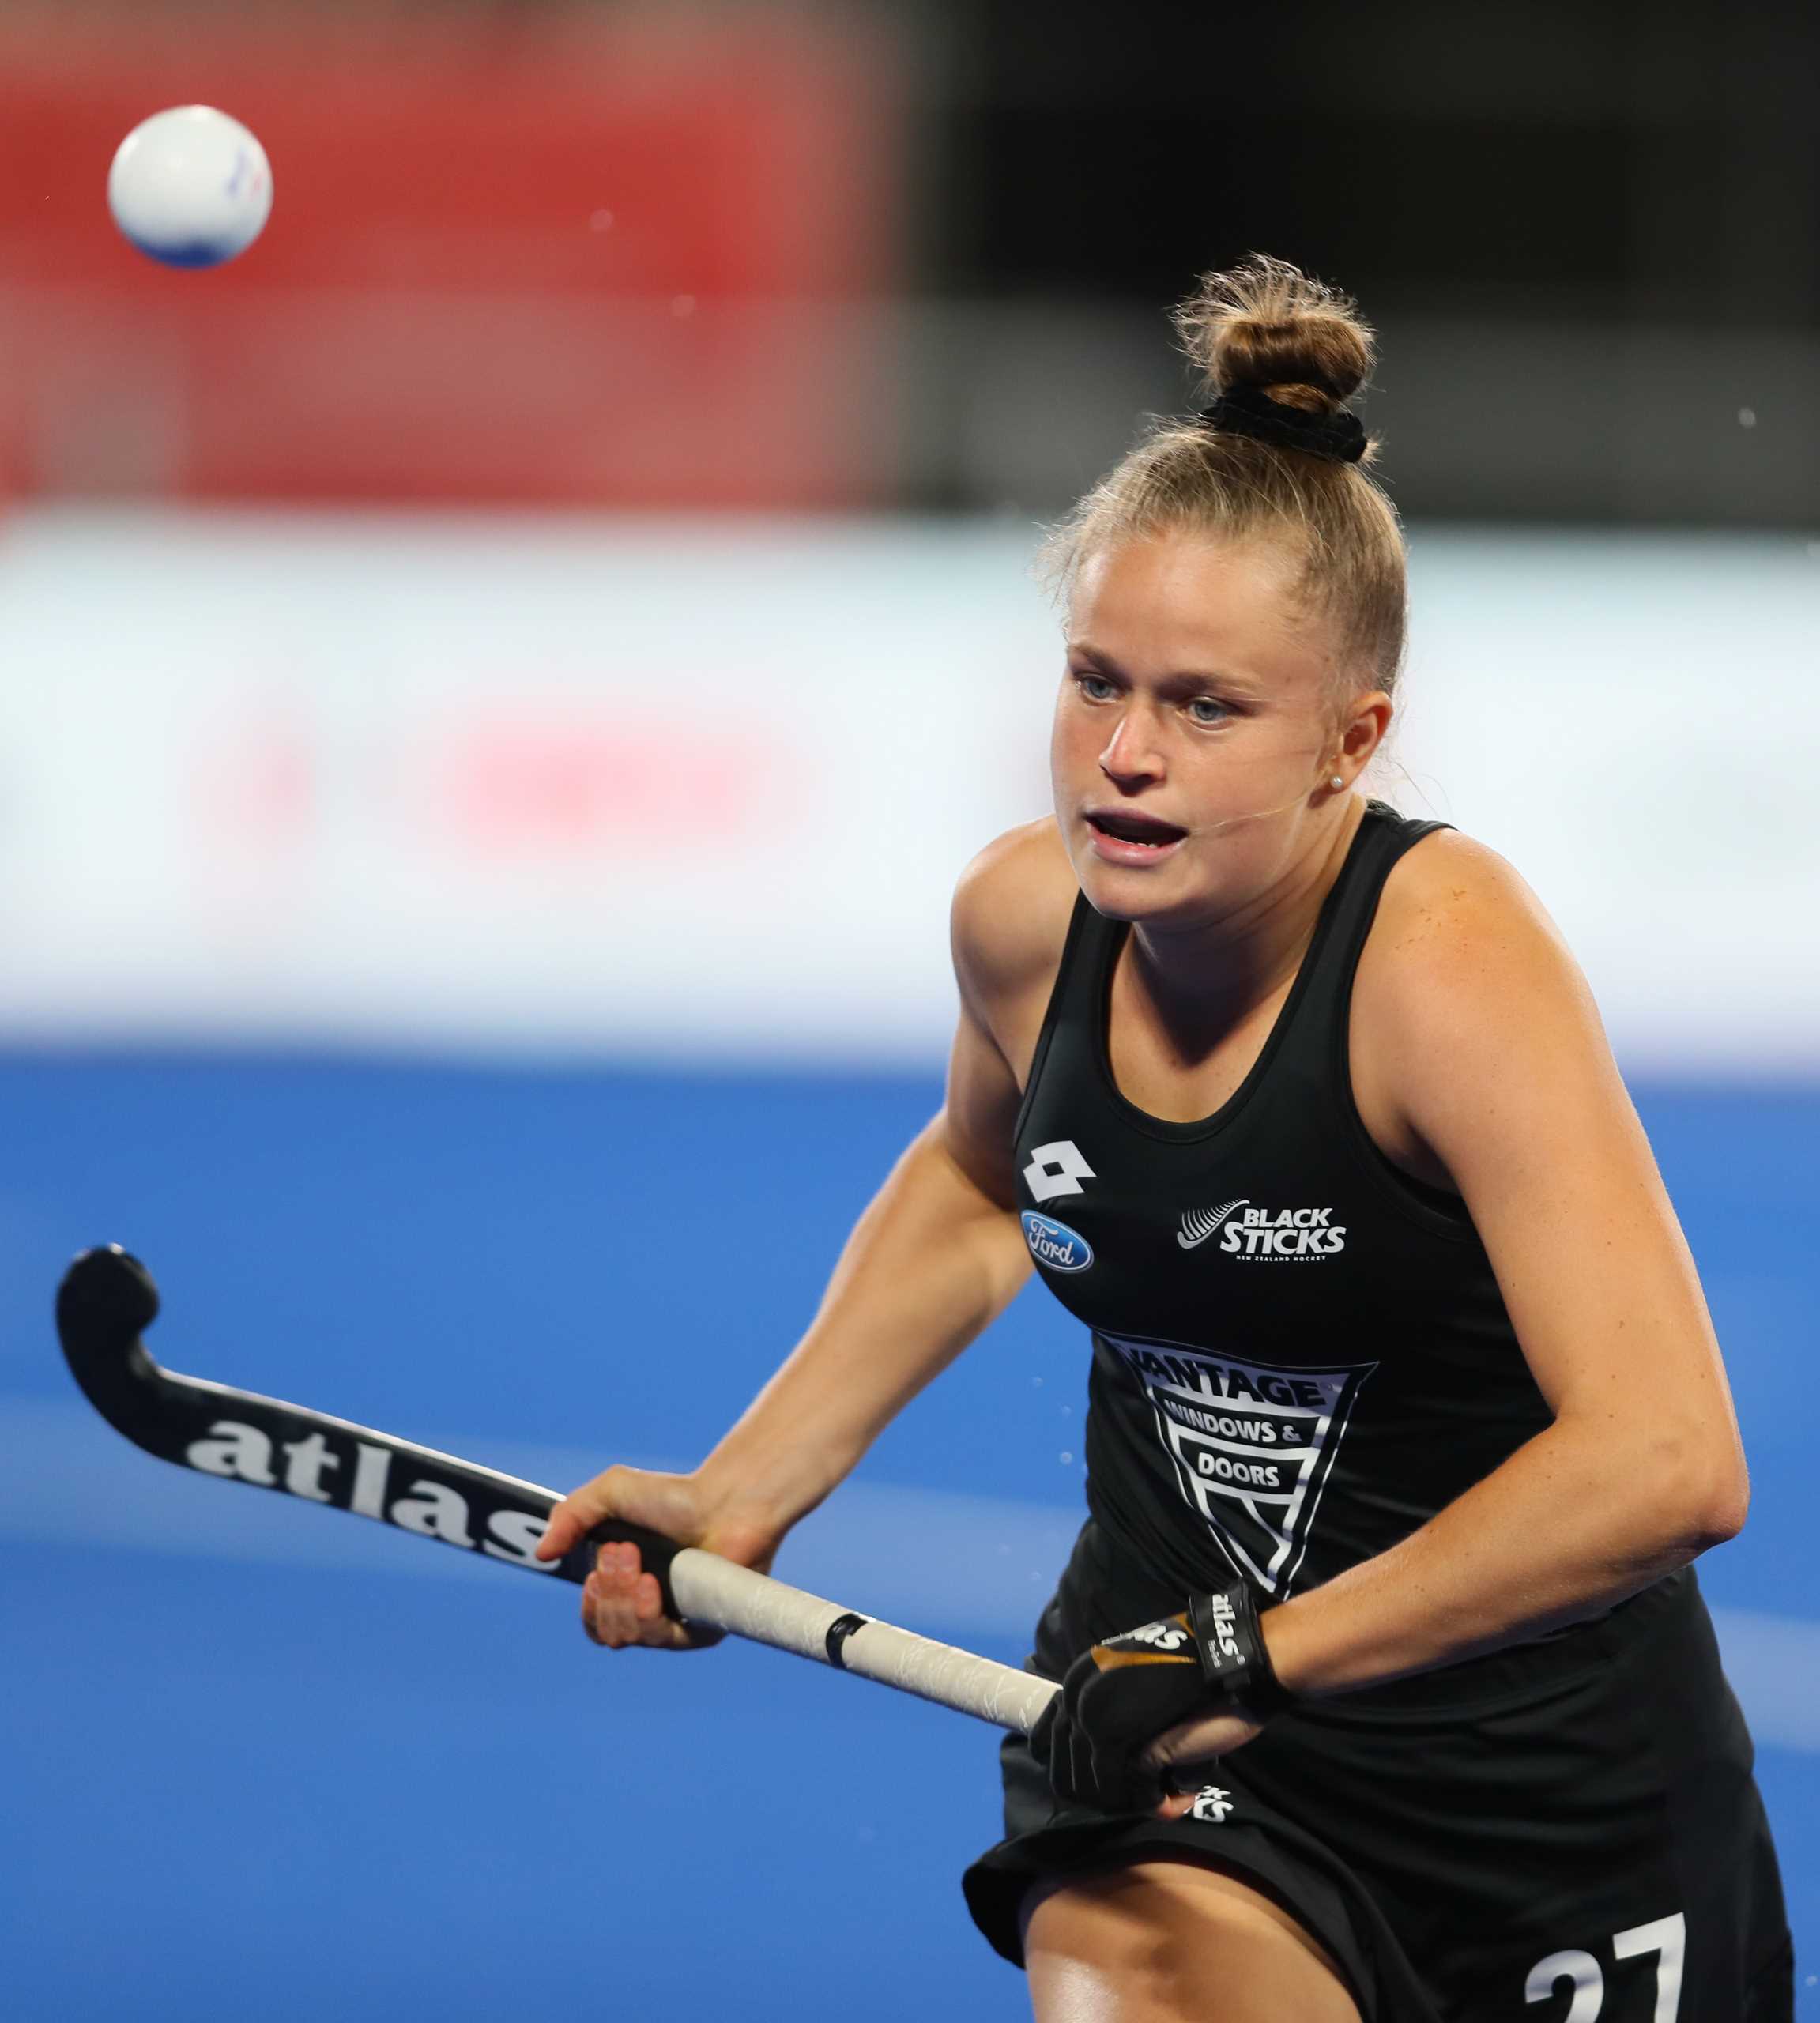 Holly Pearson during the Pro League Hockey match between the Blacksticks women and Great Britain, National Hockey Arena, Auckland, New Zealand, Saturday 8 February 2020. Photo: Simon Watts/www.bwmedia.co.nz